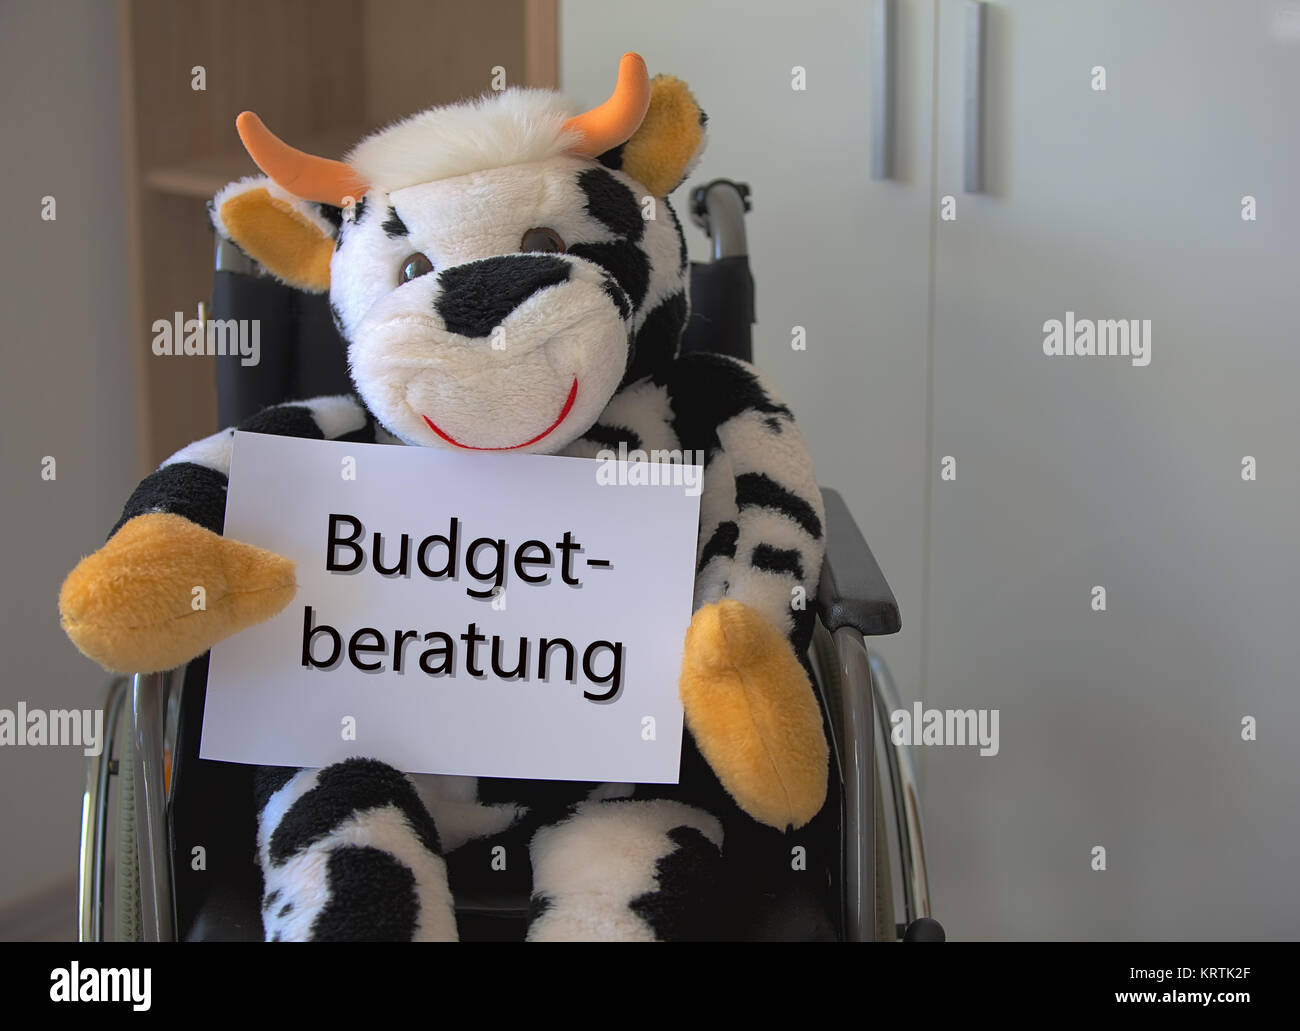 plush cow sitting in a wheelchair and holding a sign budgetberatung Stock Photo